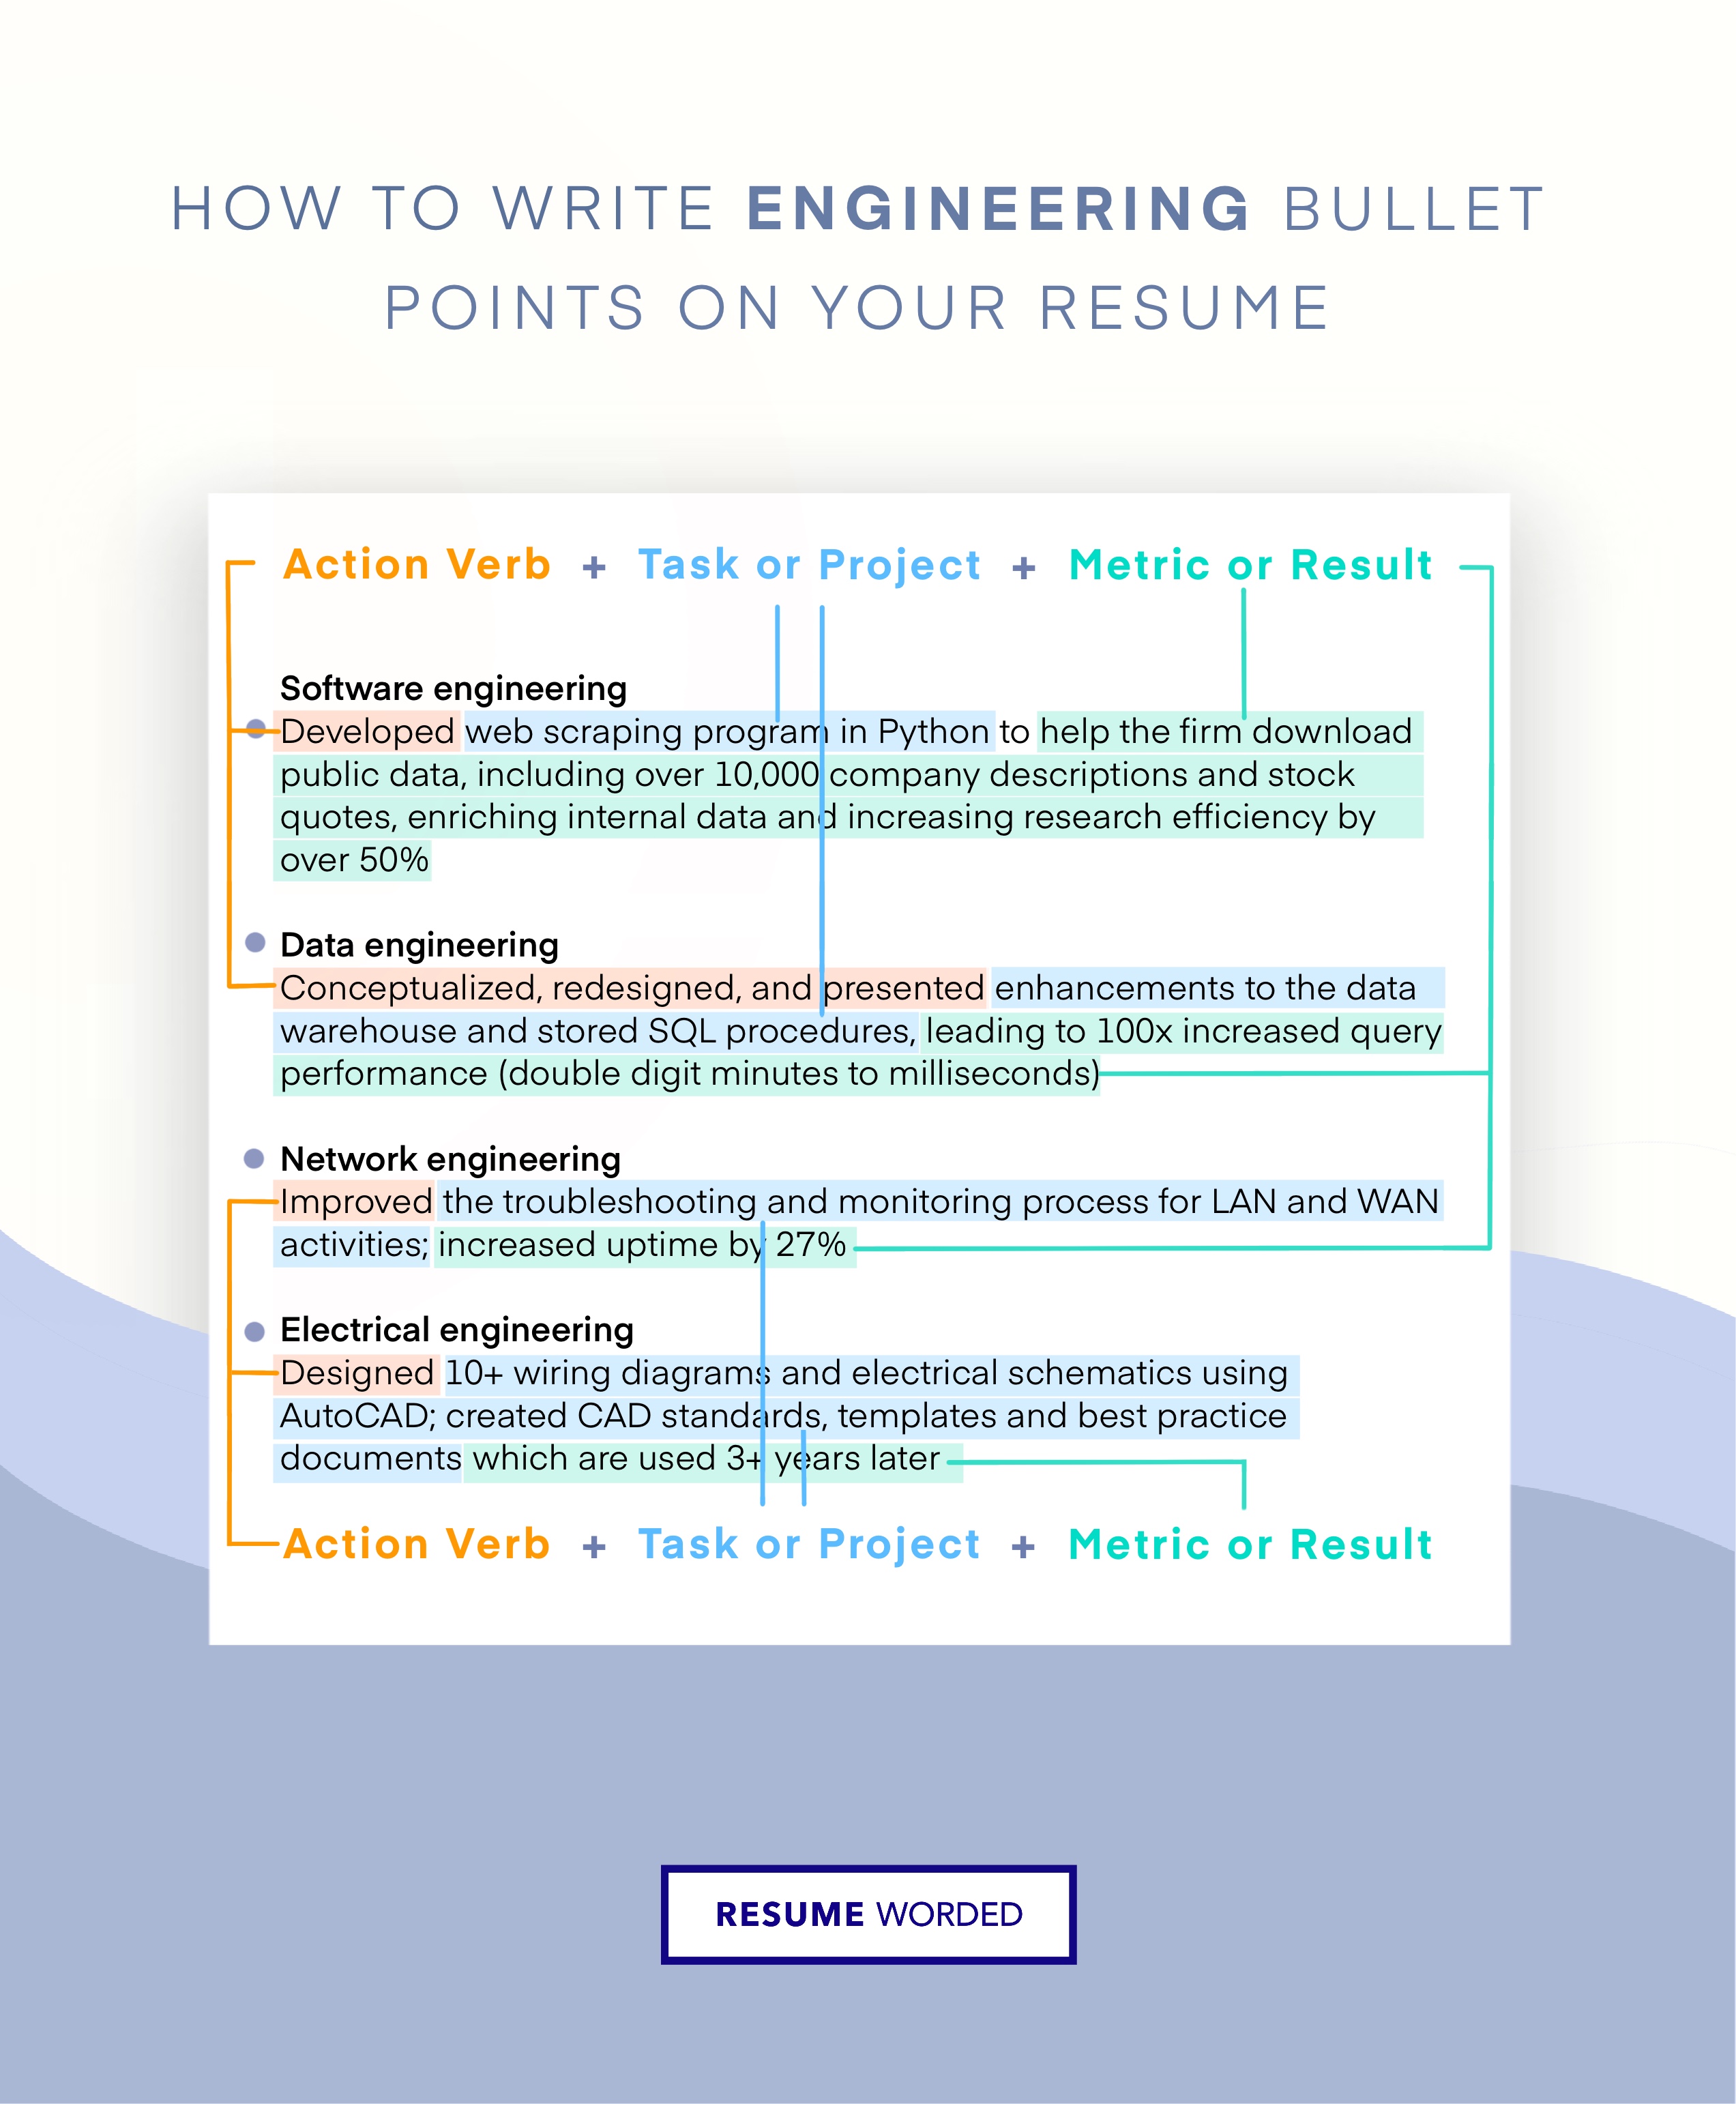 Groups skills by engineering category - Structural Engineer Resume